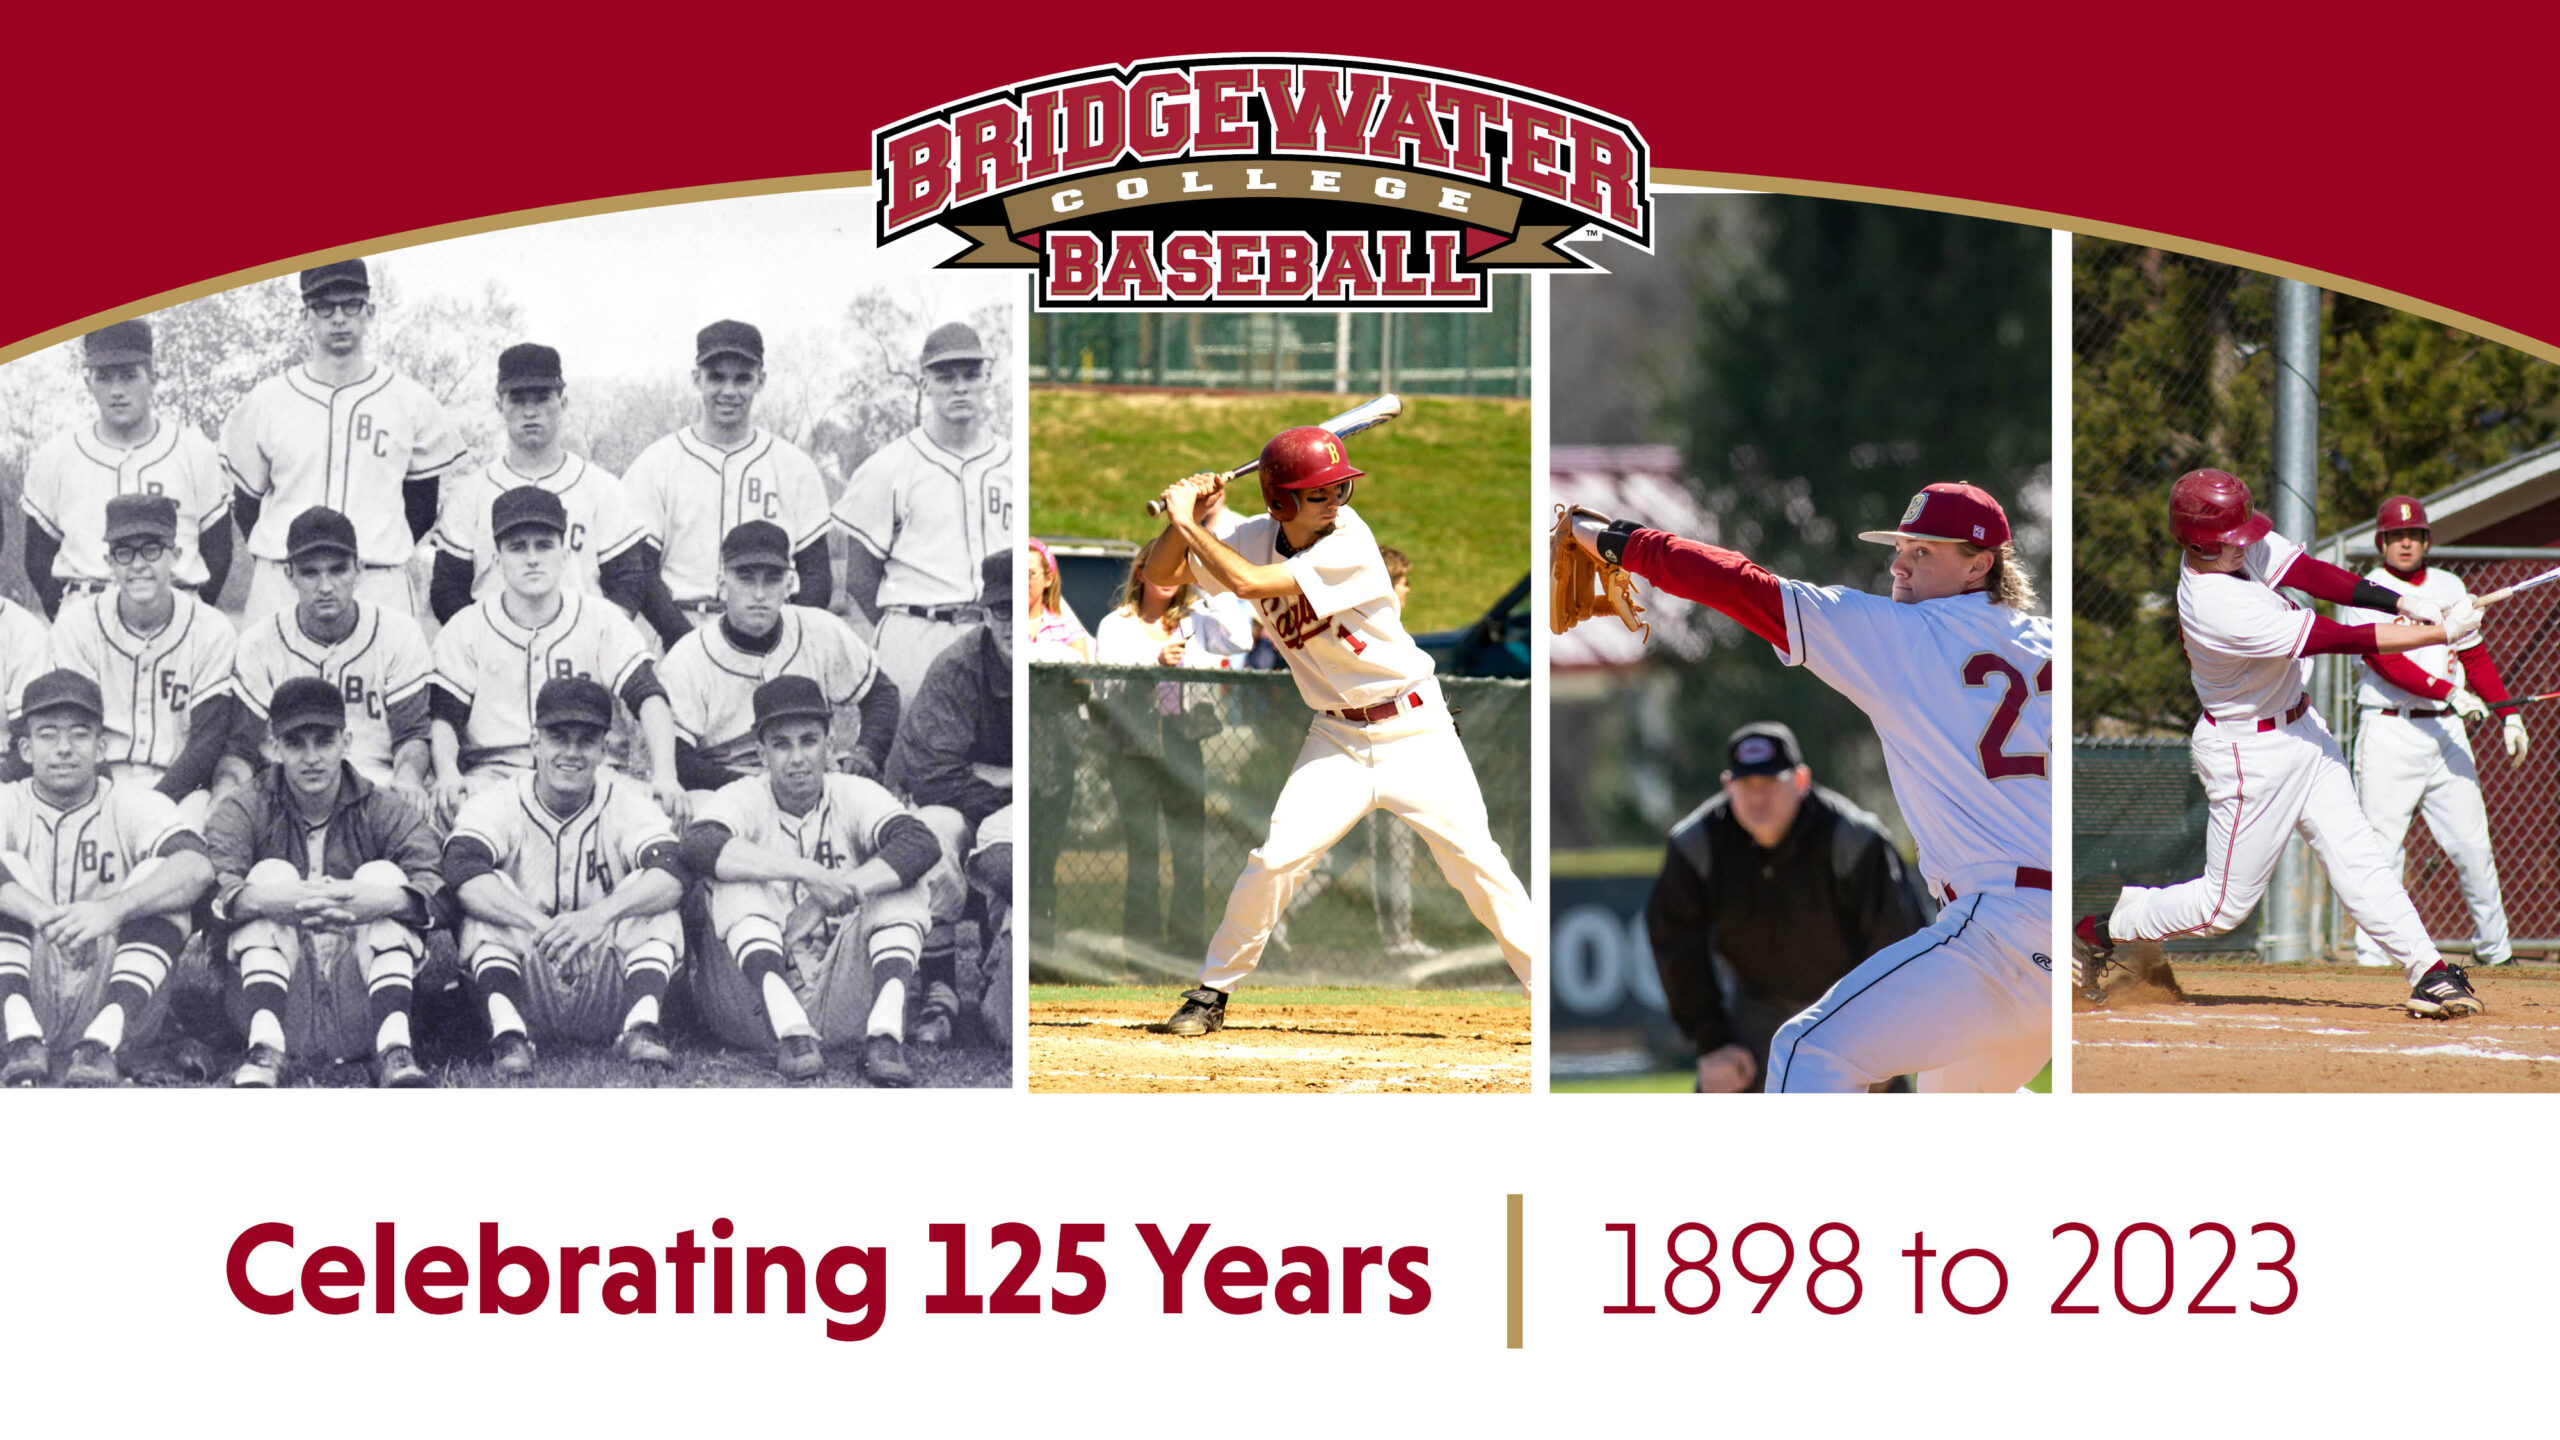 From 1898 to 2023: Celebrating the 125-year history of Bridgewater College baseball